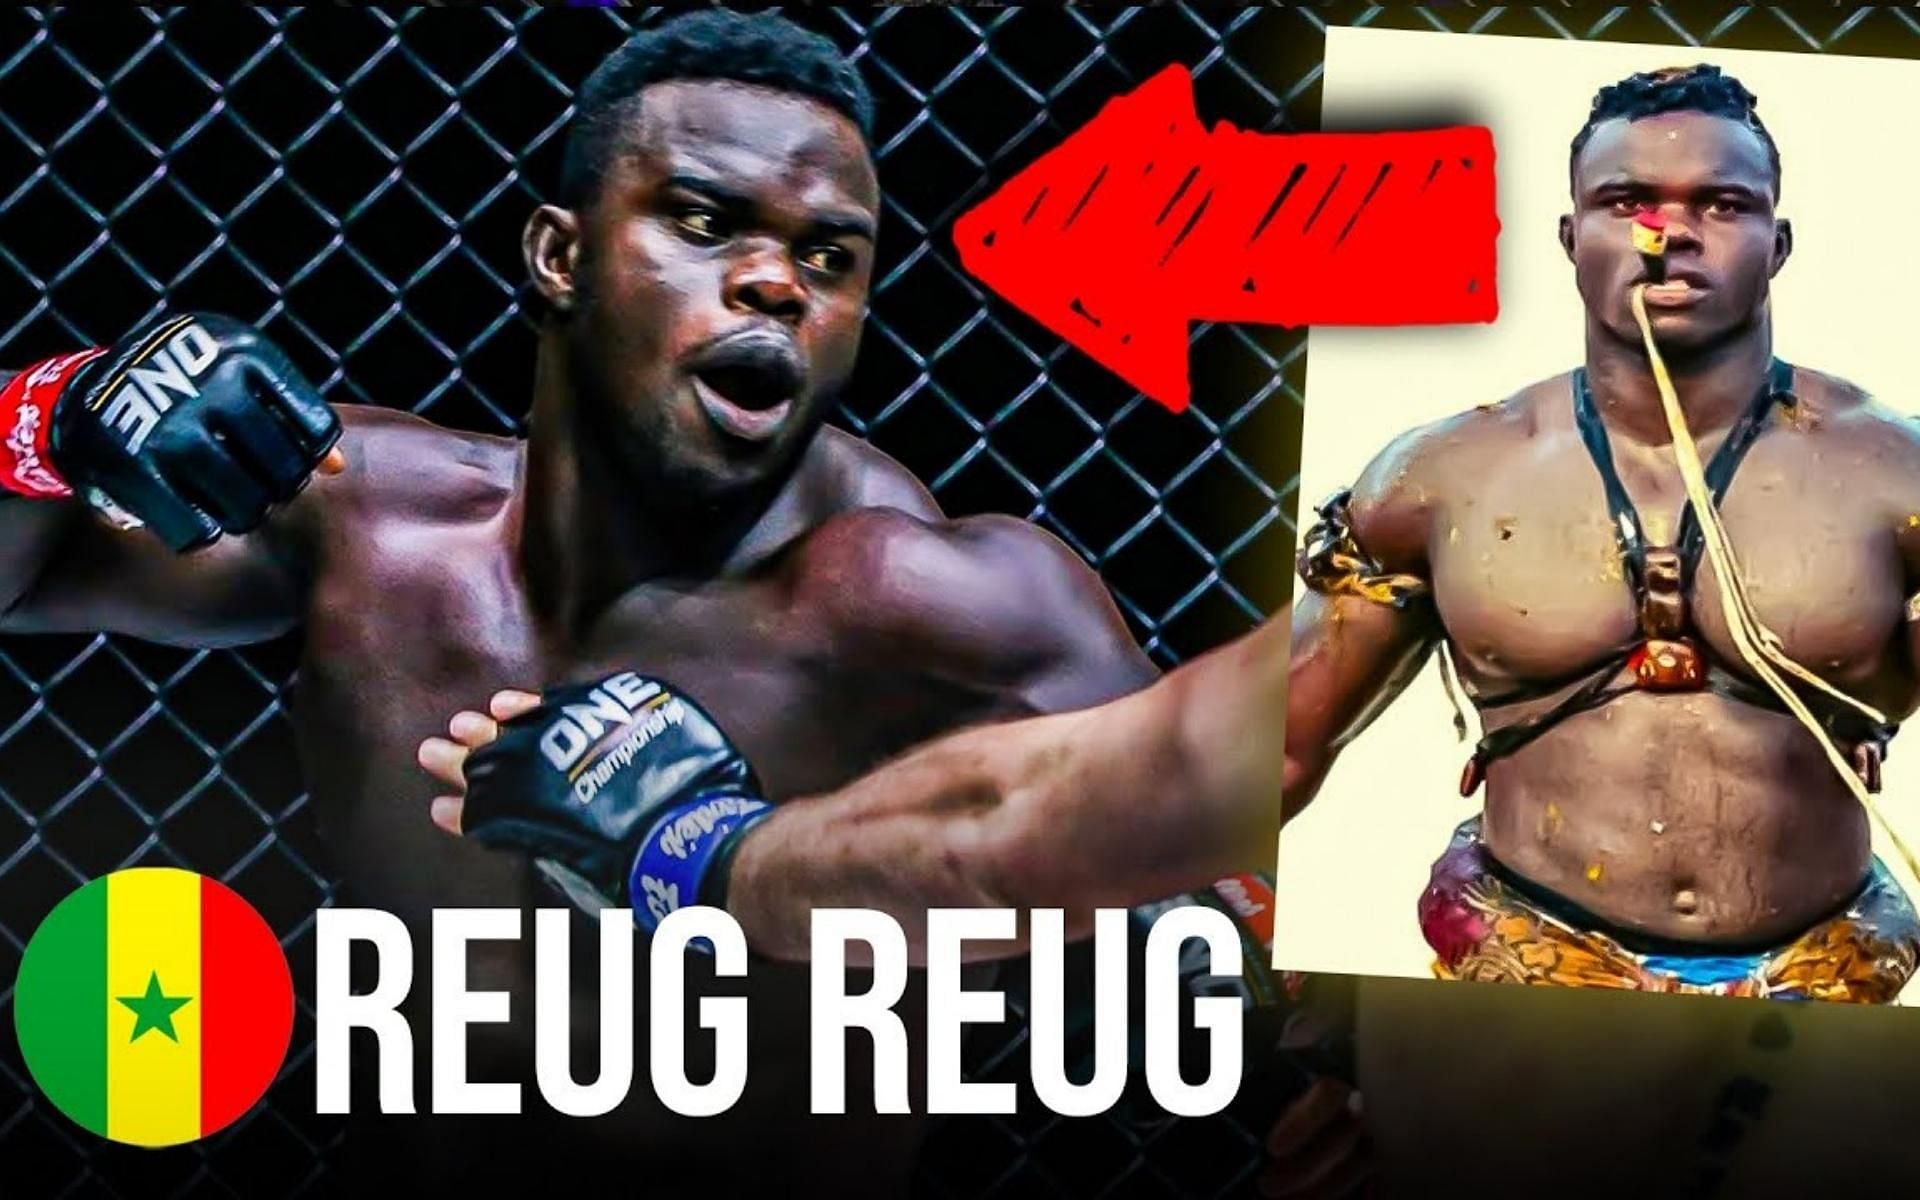 Oumar &#039;Reug Reug&#039; Kane will fight Marcus &#039;Buchecha&#039; Almeida in the main card of ONE: Eersel vs.Sadikovic. (Image courtesy of ONE Championsip&#039;s YouTube channel)